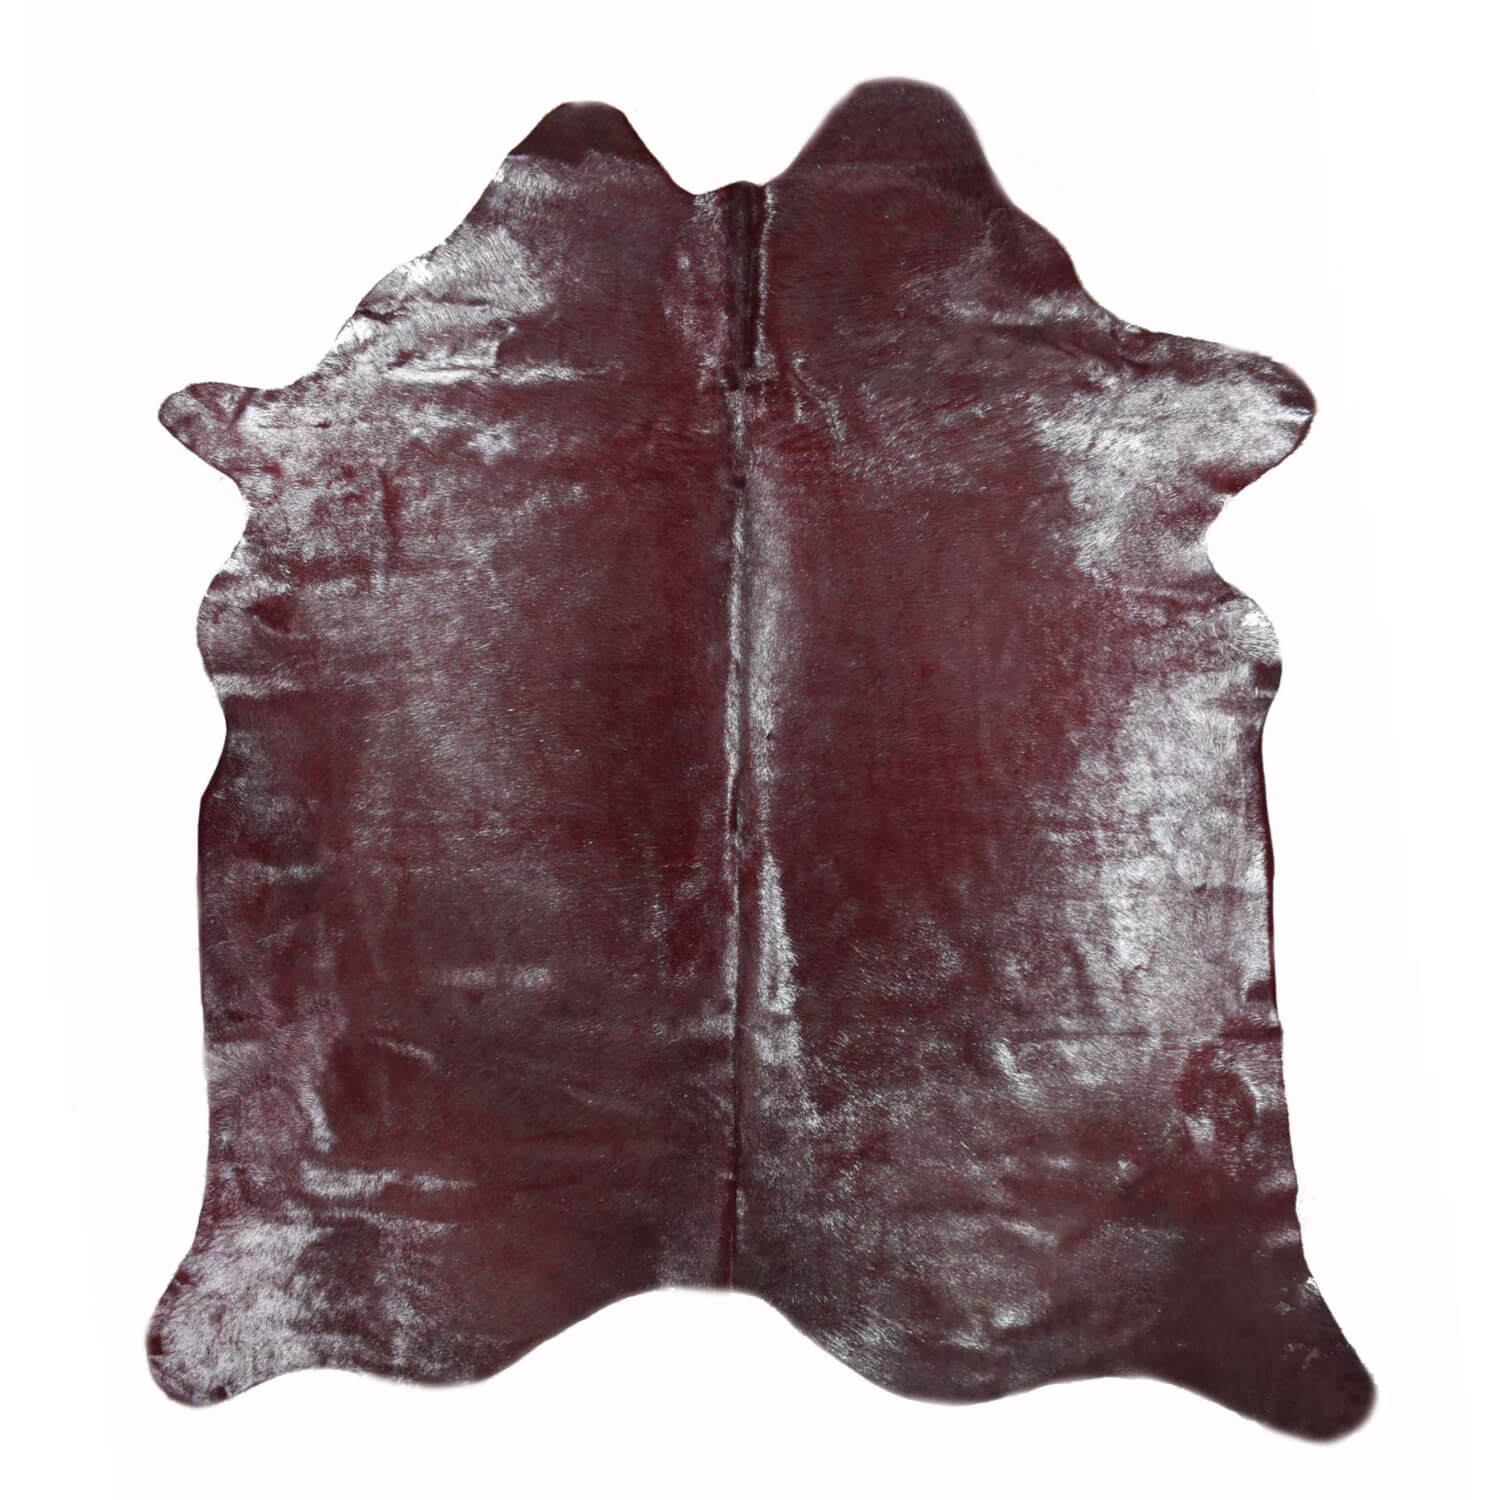 Red with Silver Frost X-Large Brazilian Cowhide Rug 6'0H x 7'5 W #1001REDSF by Hudson Hides